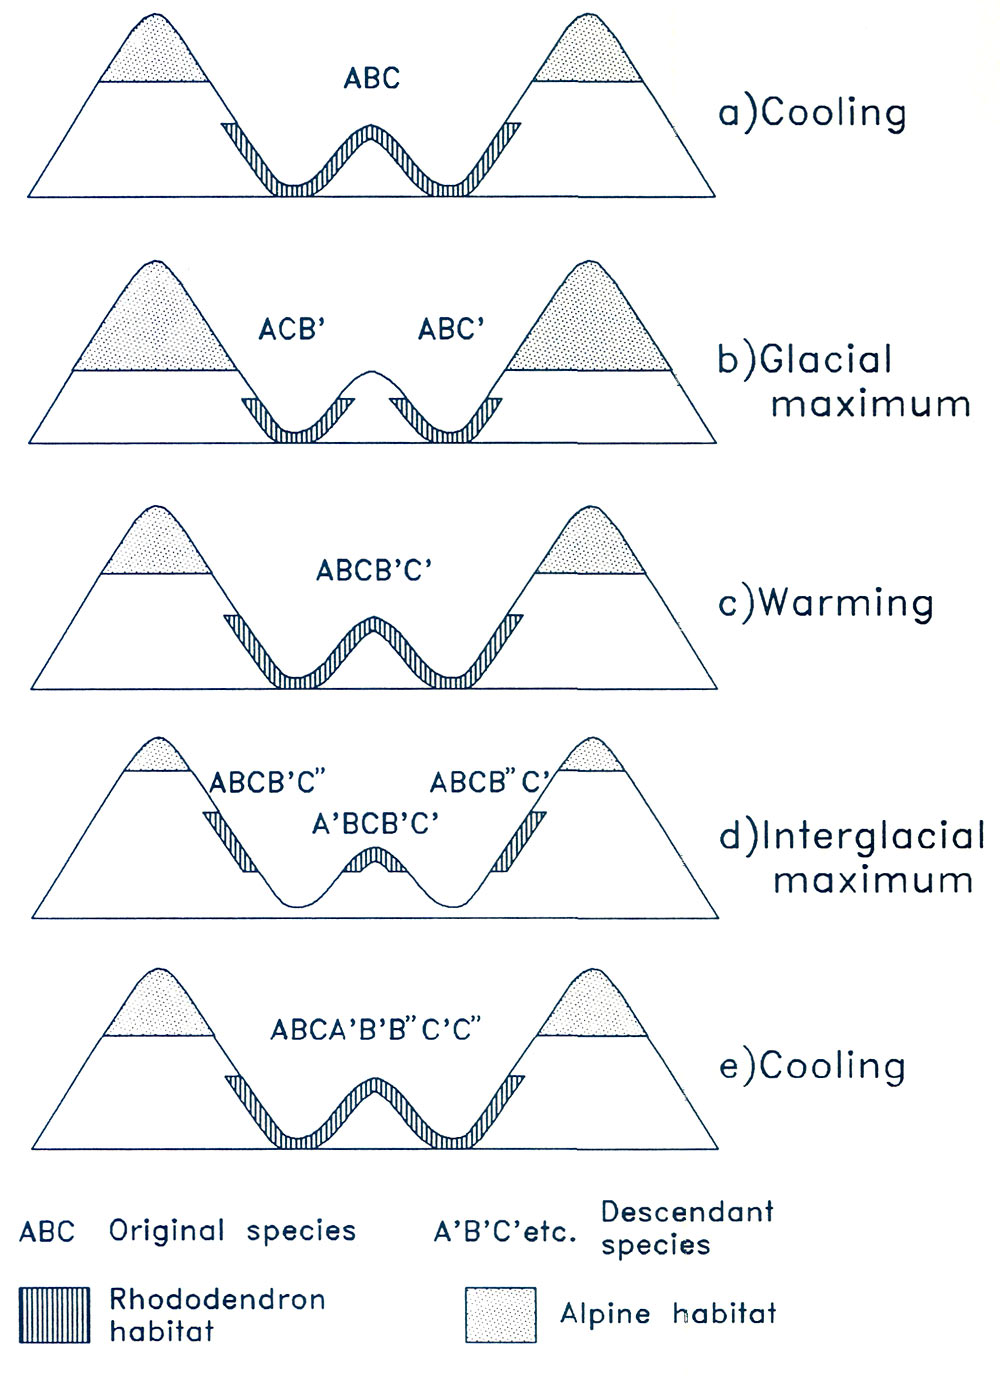 Figure 11. Hypothesis of speciation 
during glacial cycling in region of extreme relief.